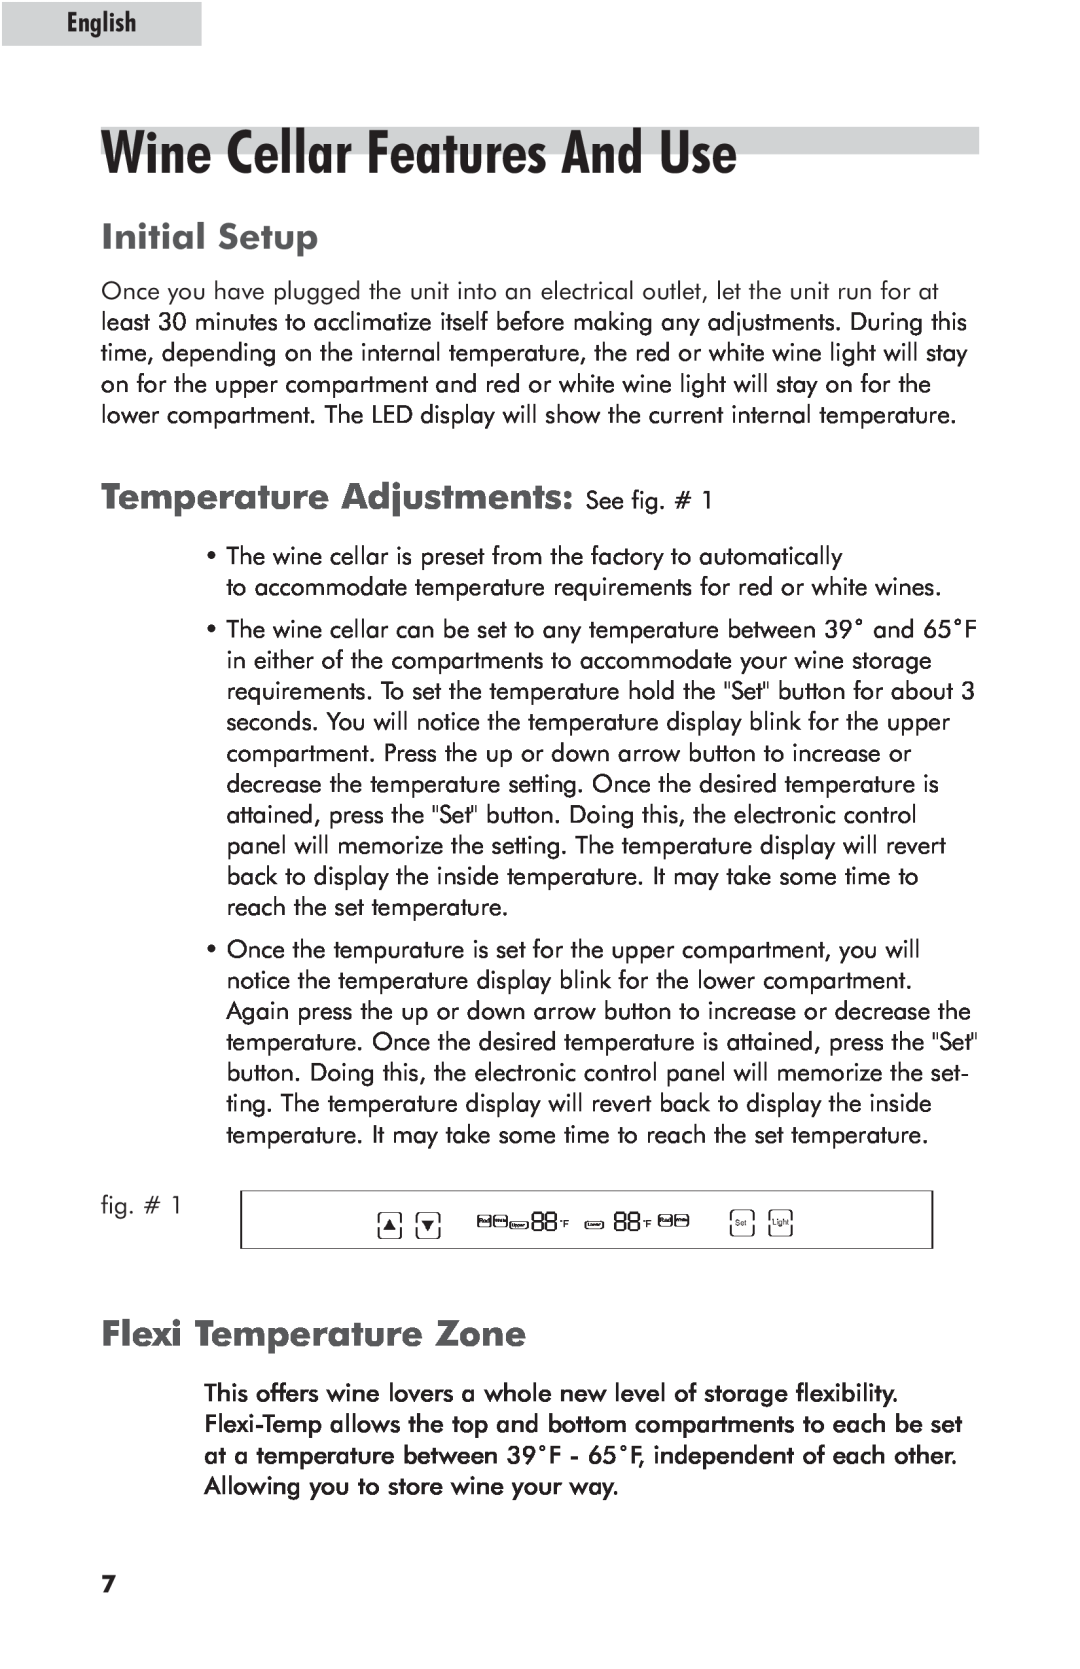 Haier HVZ040AB Wine Cellar Features And Use, Initial Setup, Temperature Adjustments: See fig. #, Flexi Temperature Zone 